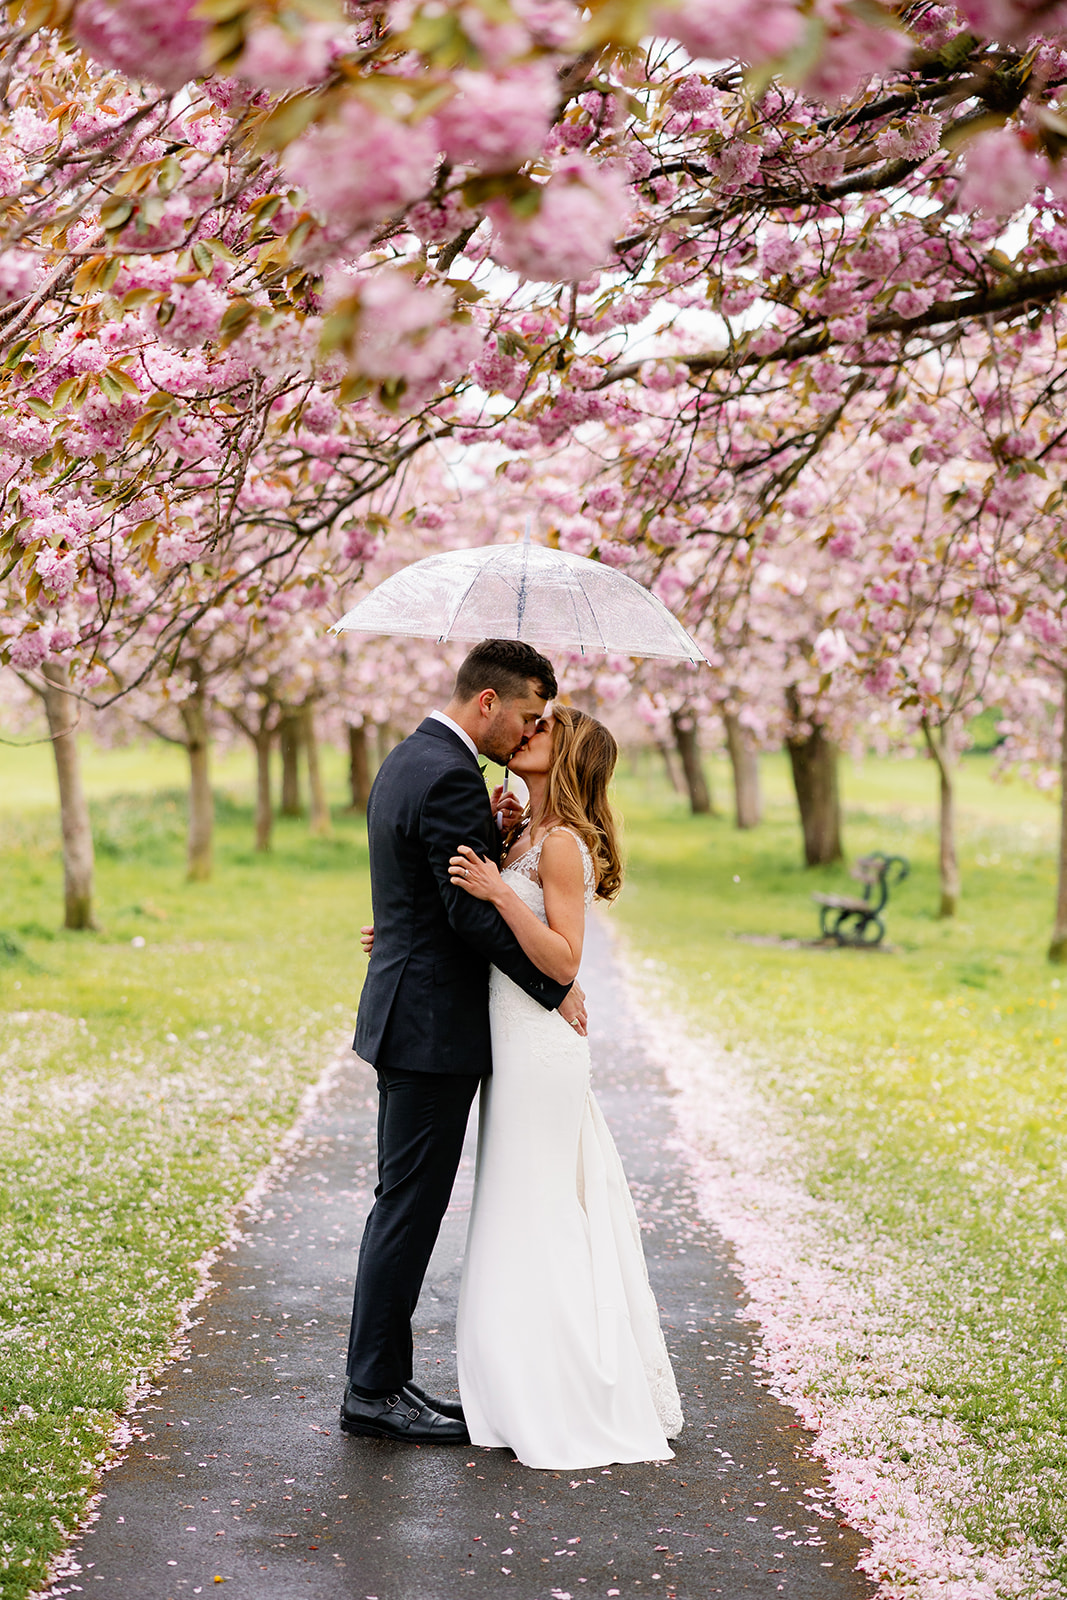 A bride and groom kissing on The Stray in Harrogate under cherry blossom 